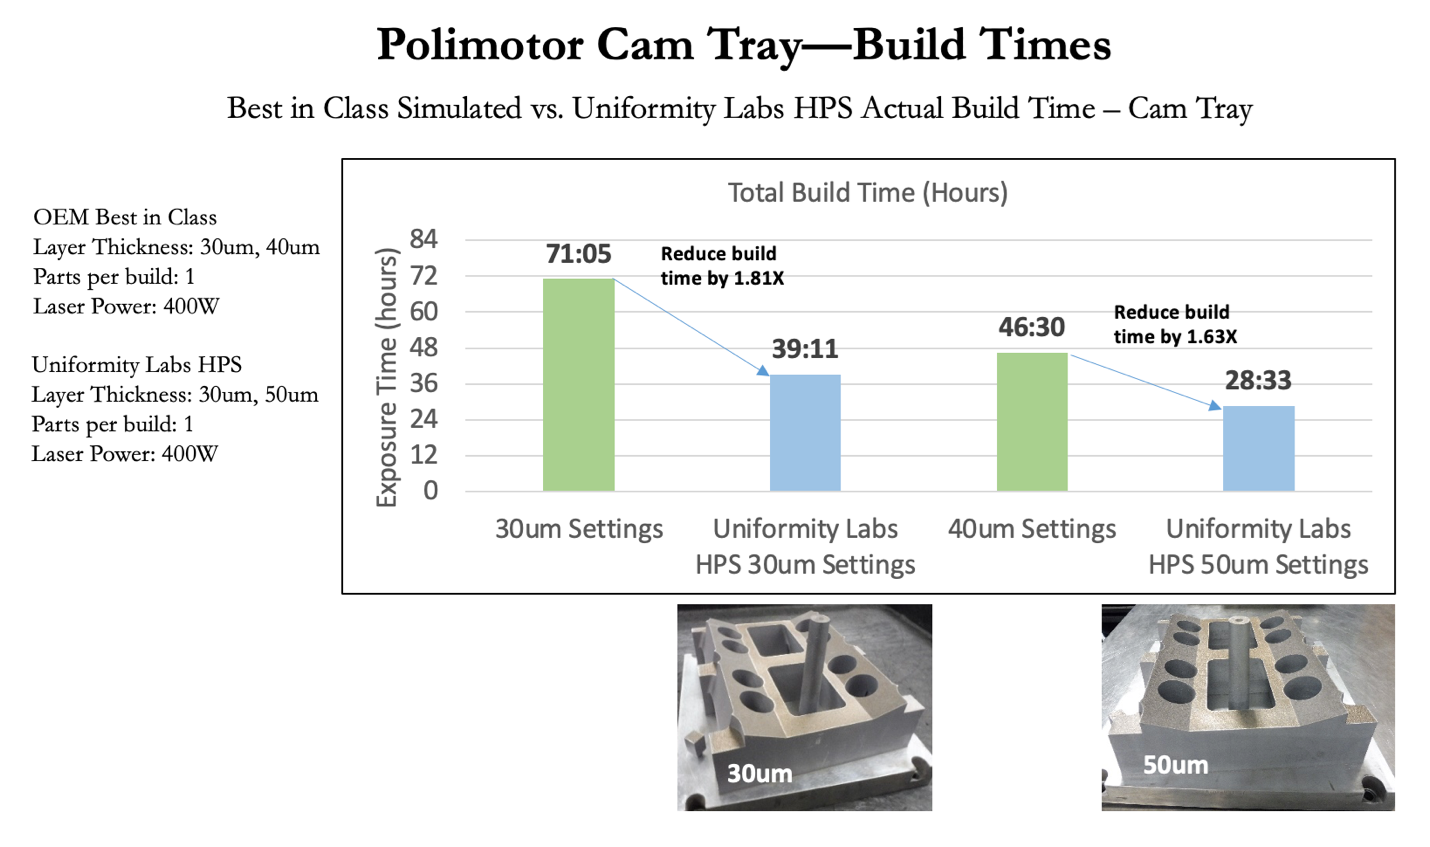 Best in Class Simulated vs. Uniformity Labs HPS Actual Build Time - Cam Tray